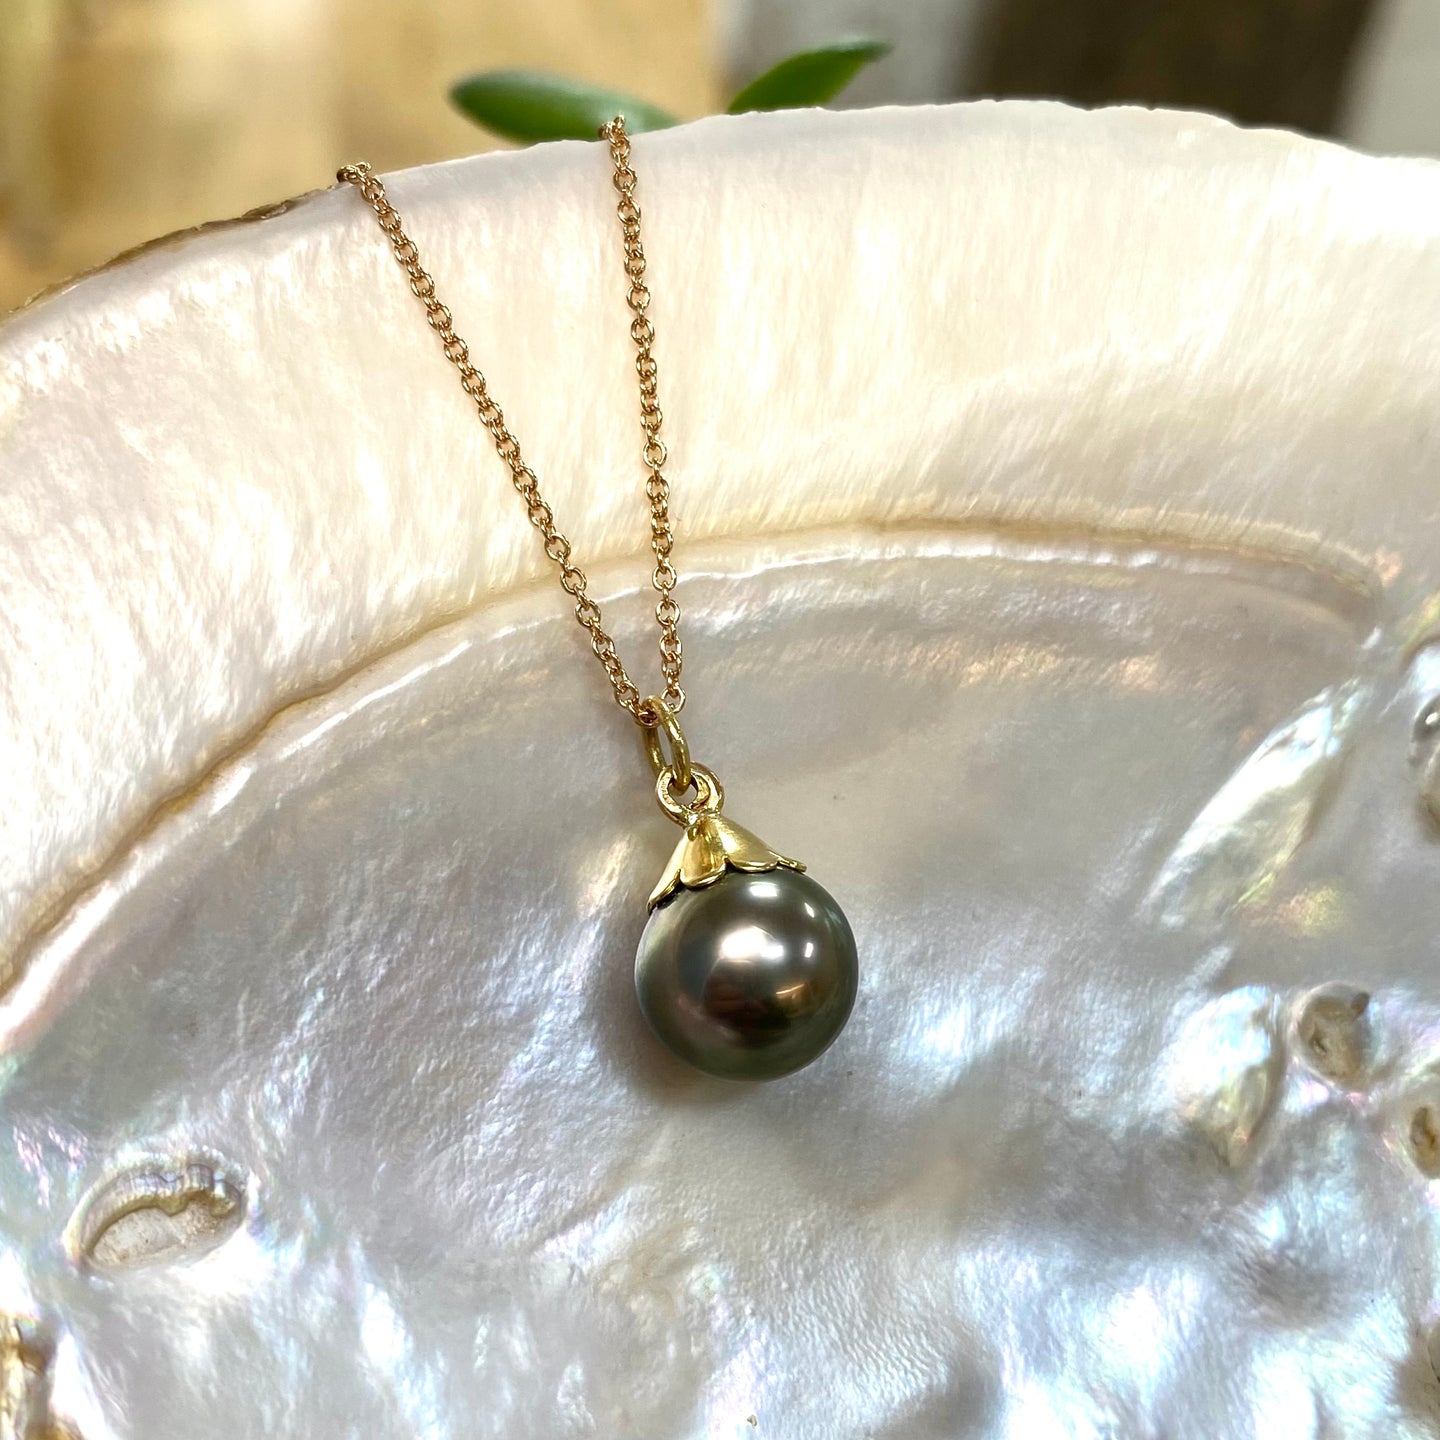 Tahitian Pearl and 18ct Yellow Gold Pendant and Chain